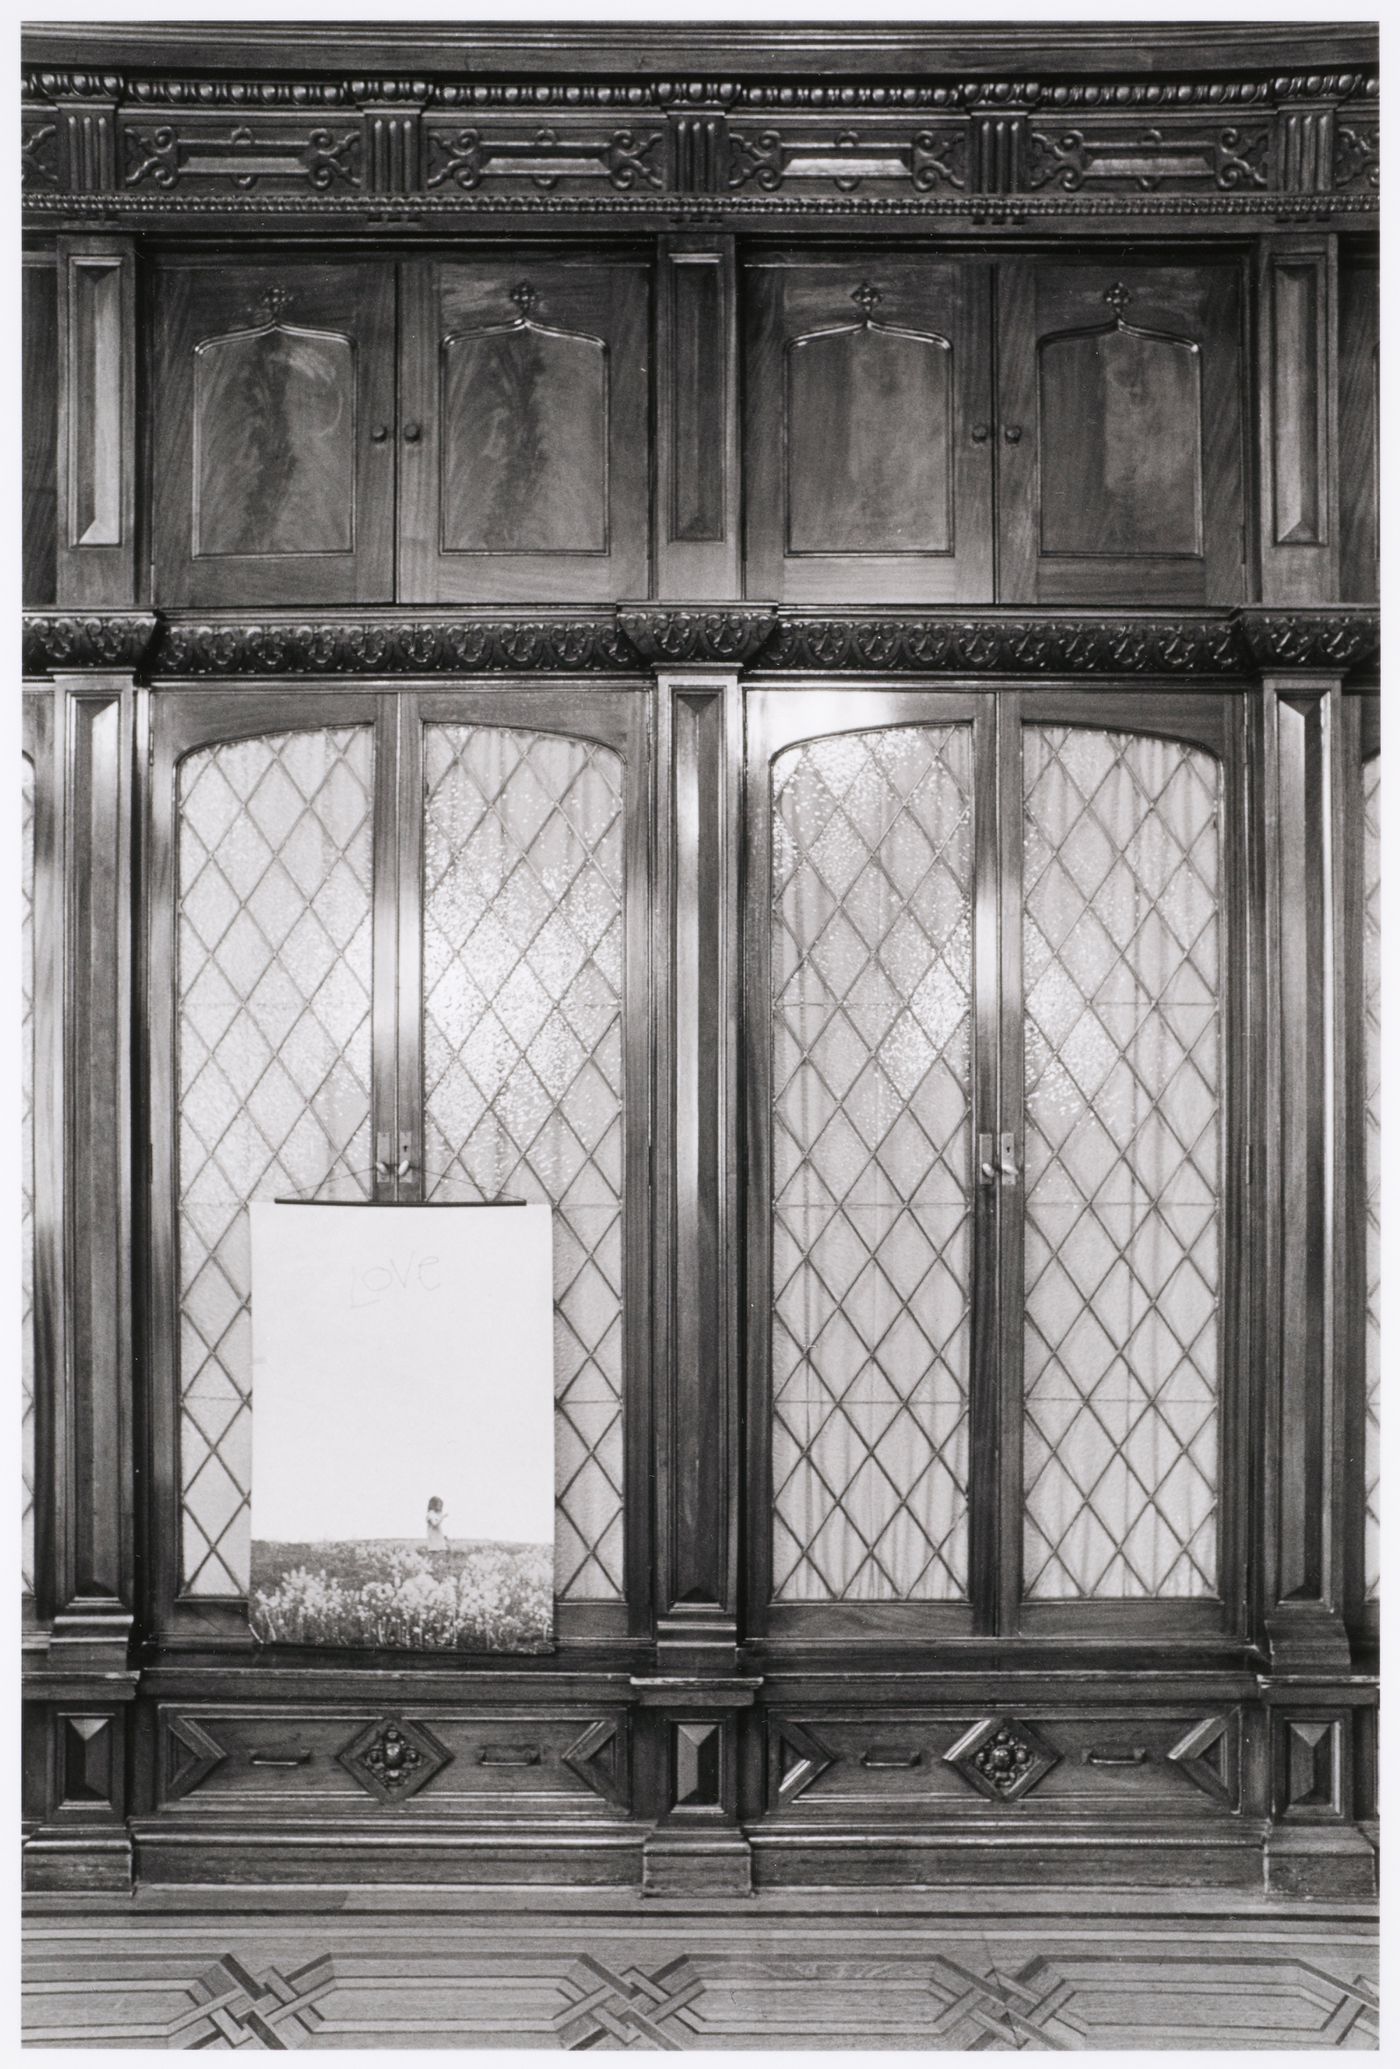 Close-up view of the paneling and glass doors of the library (now demolished) in the east part of Shaughnessy House, Montréal, Québec